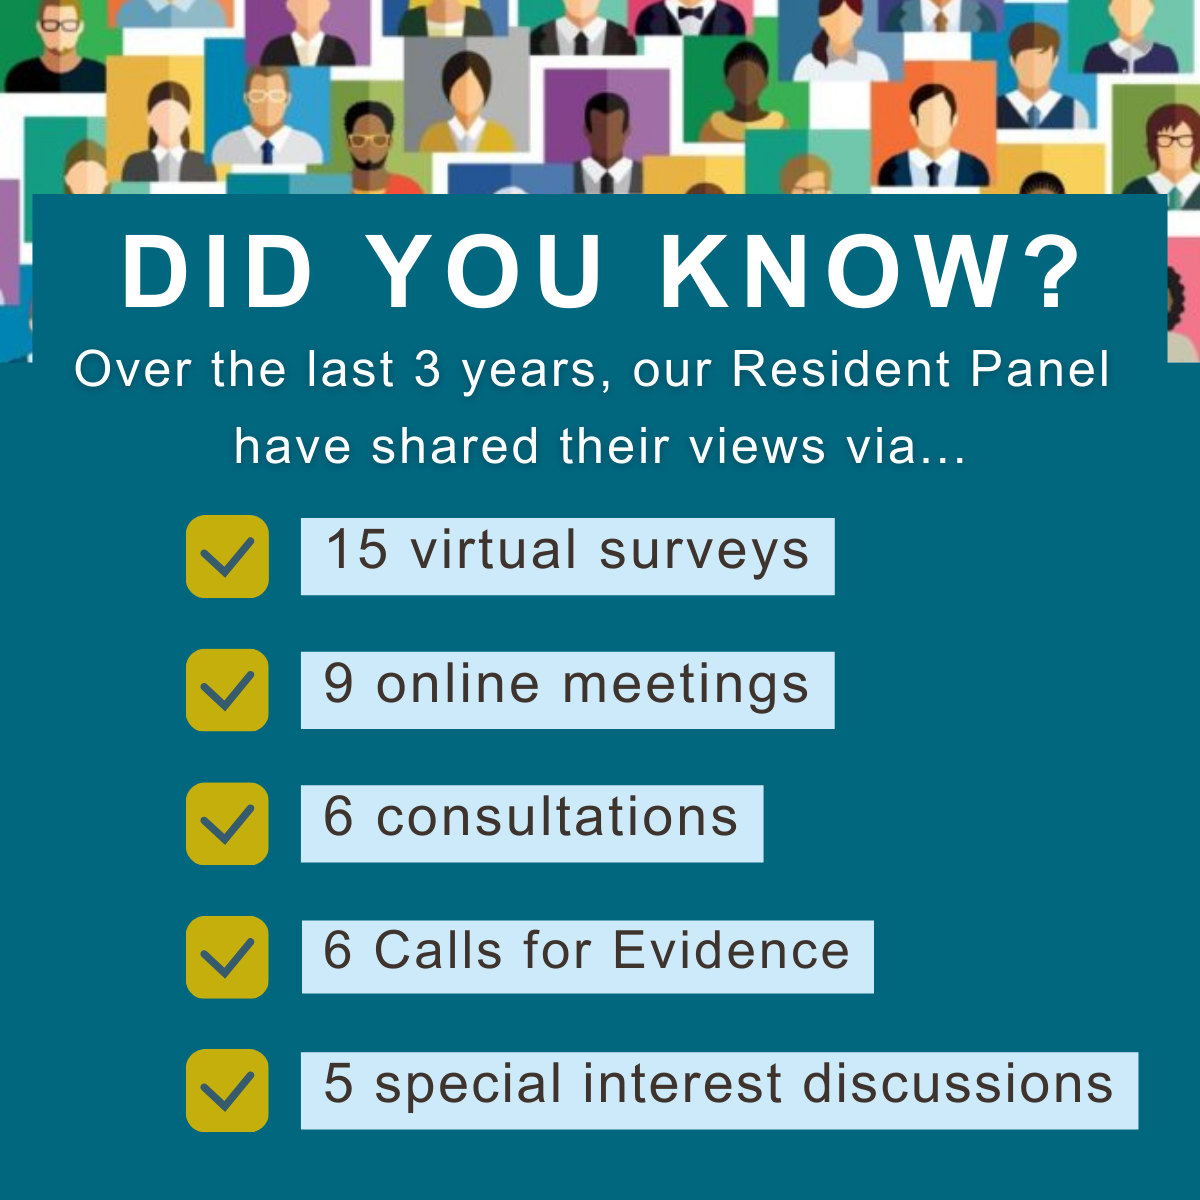 Did you know? Over the past 3 years, our Resident Panel have shared their views via: - 15 virtual surveys - 9 online meetings - 6 consultations - 6 Calls for Evidence - 5 special interest discussions